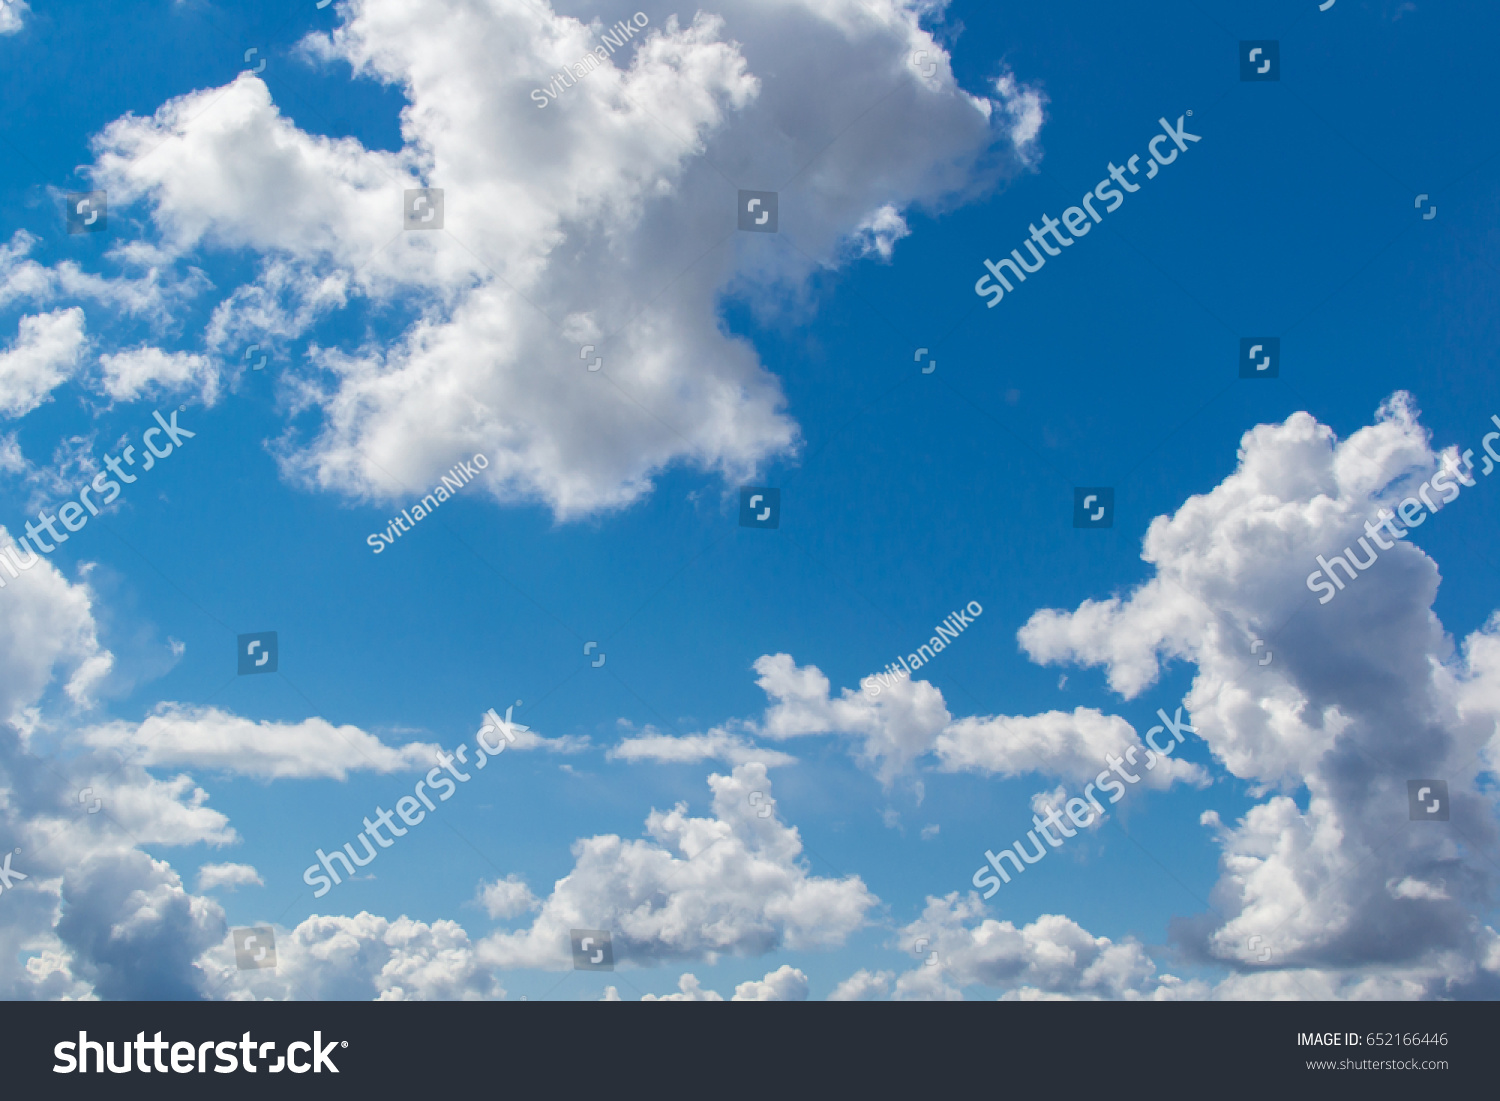 Blue Sky Clouds Background Wallpaper Stock Photo 652166446